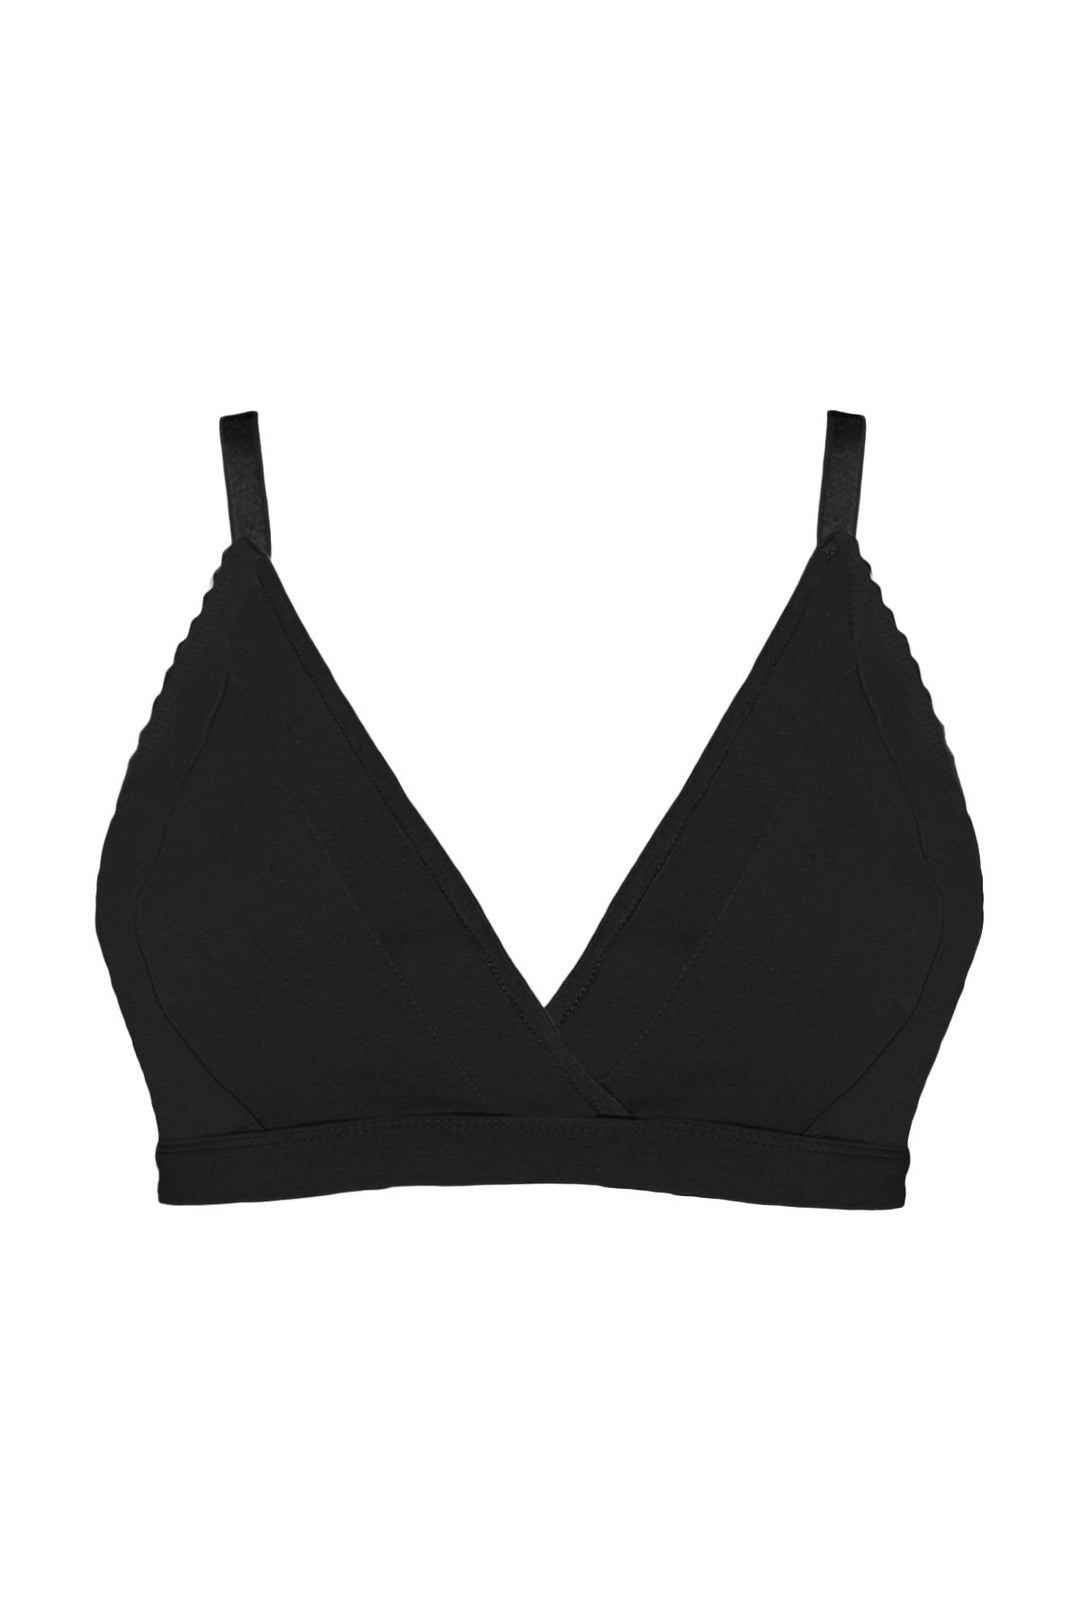 PENNY Organic Extra Full Cup bralette in black